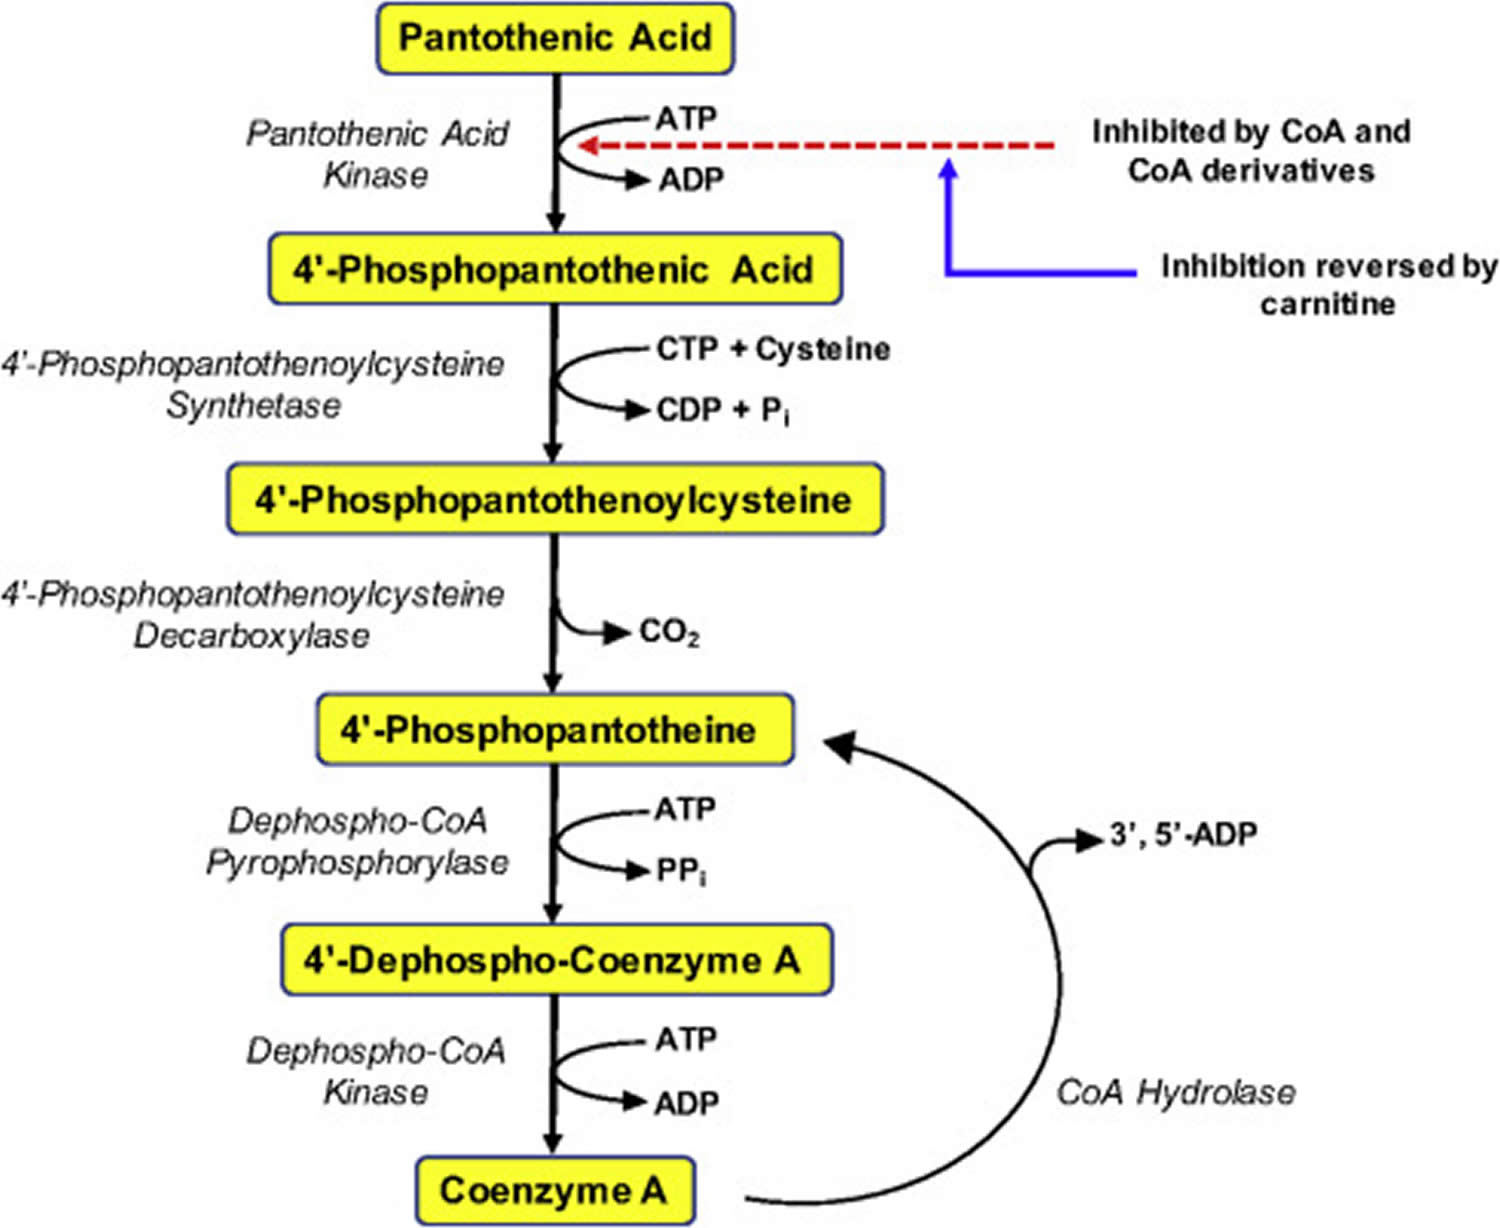 Coenzyme A synthesis from Pantothenic Acid